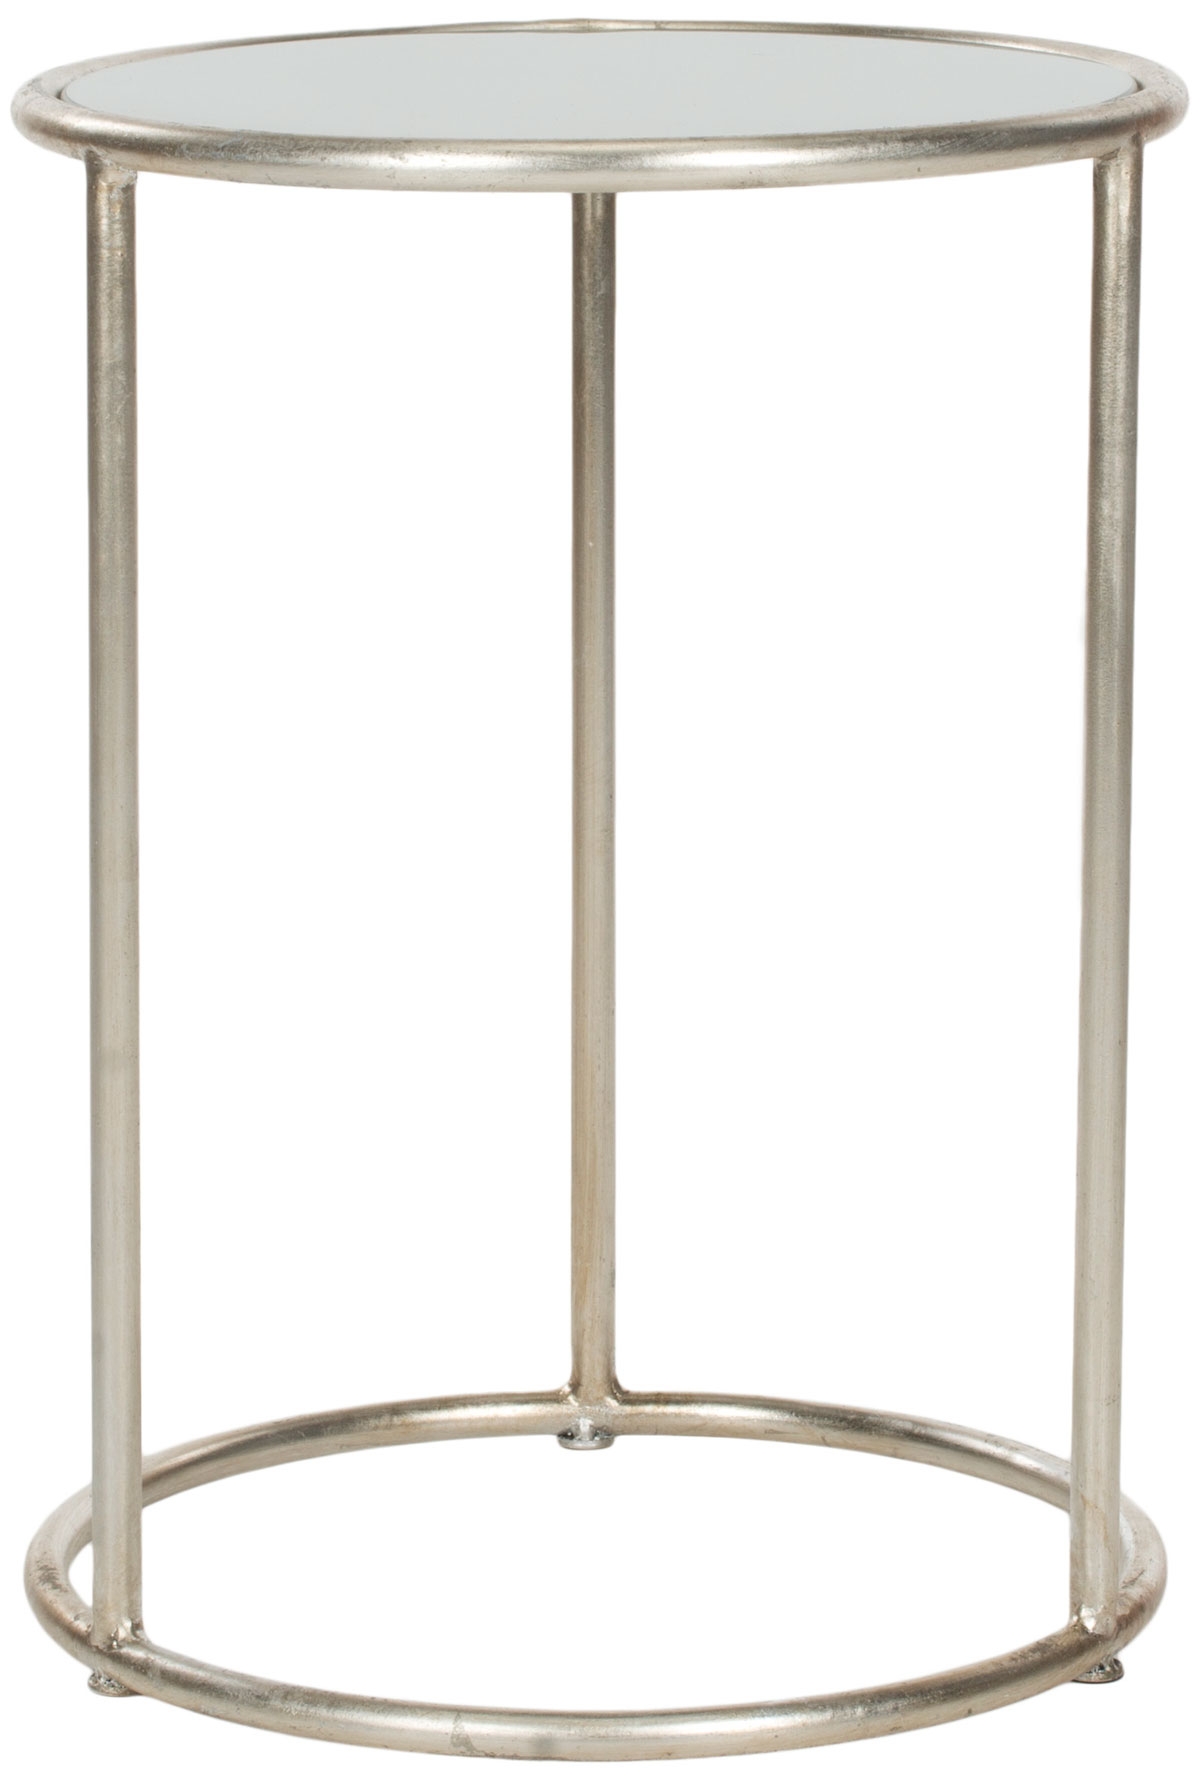 Shay Glass Top Accent Table - Silver/Grey - Arlo Home - Image 2